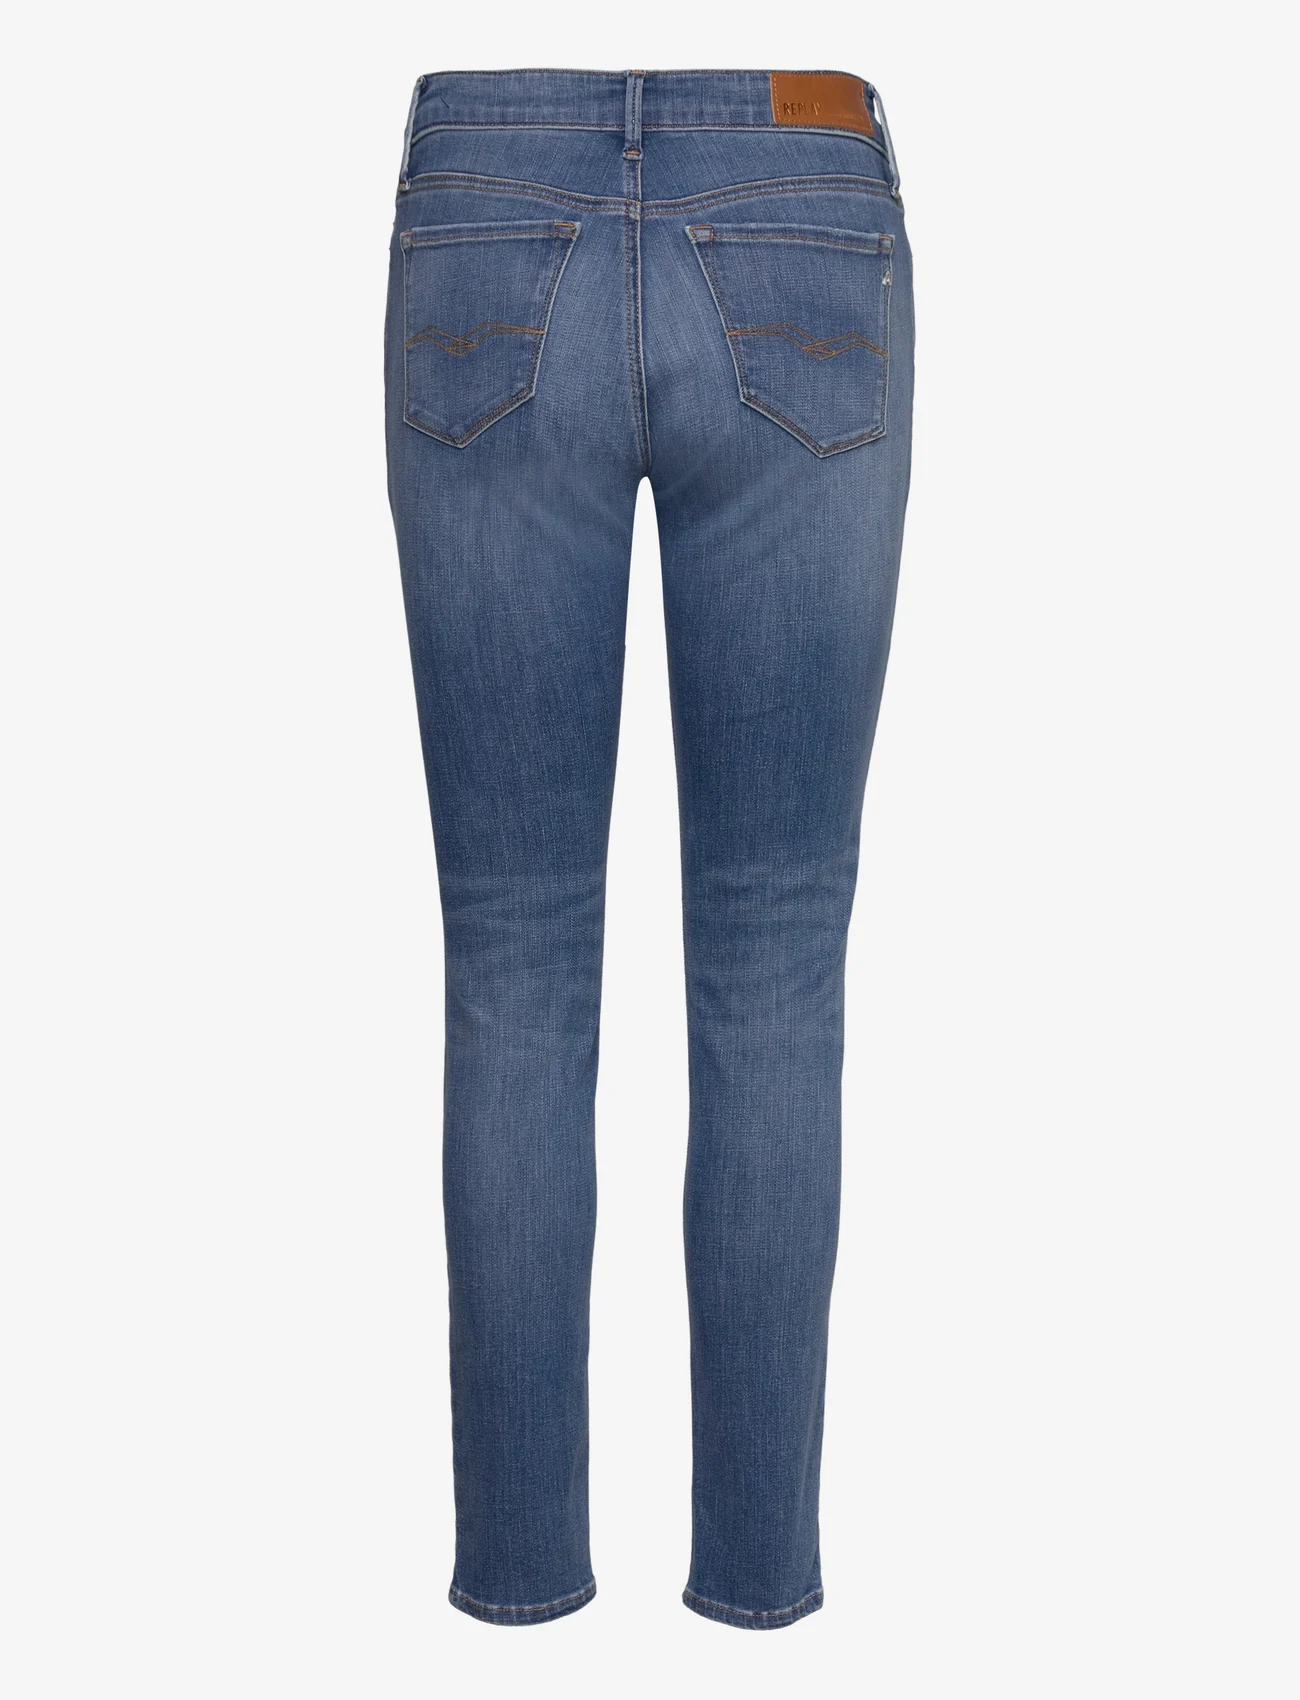 Replay - LUZIEN Trousers SKINNY HIGH WAIST - skinny jeans - blue - 1